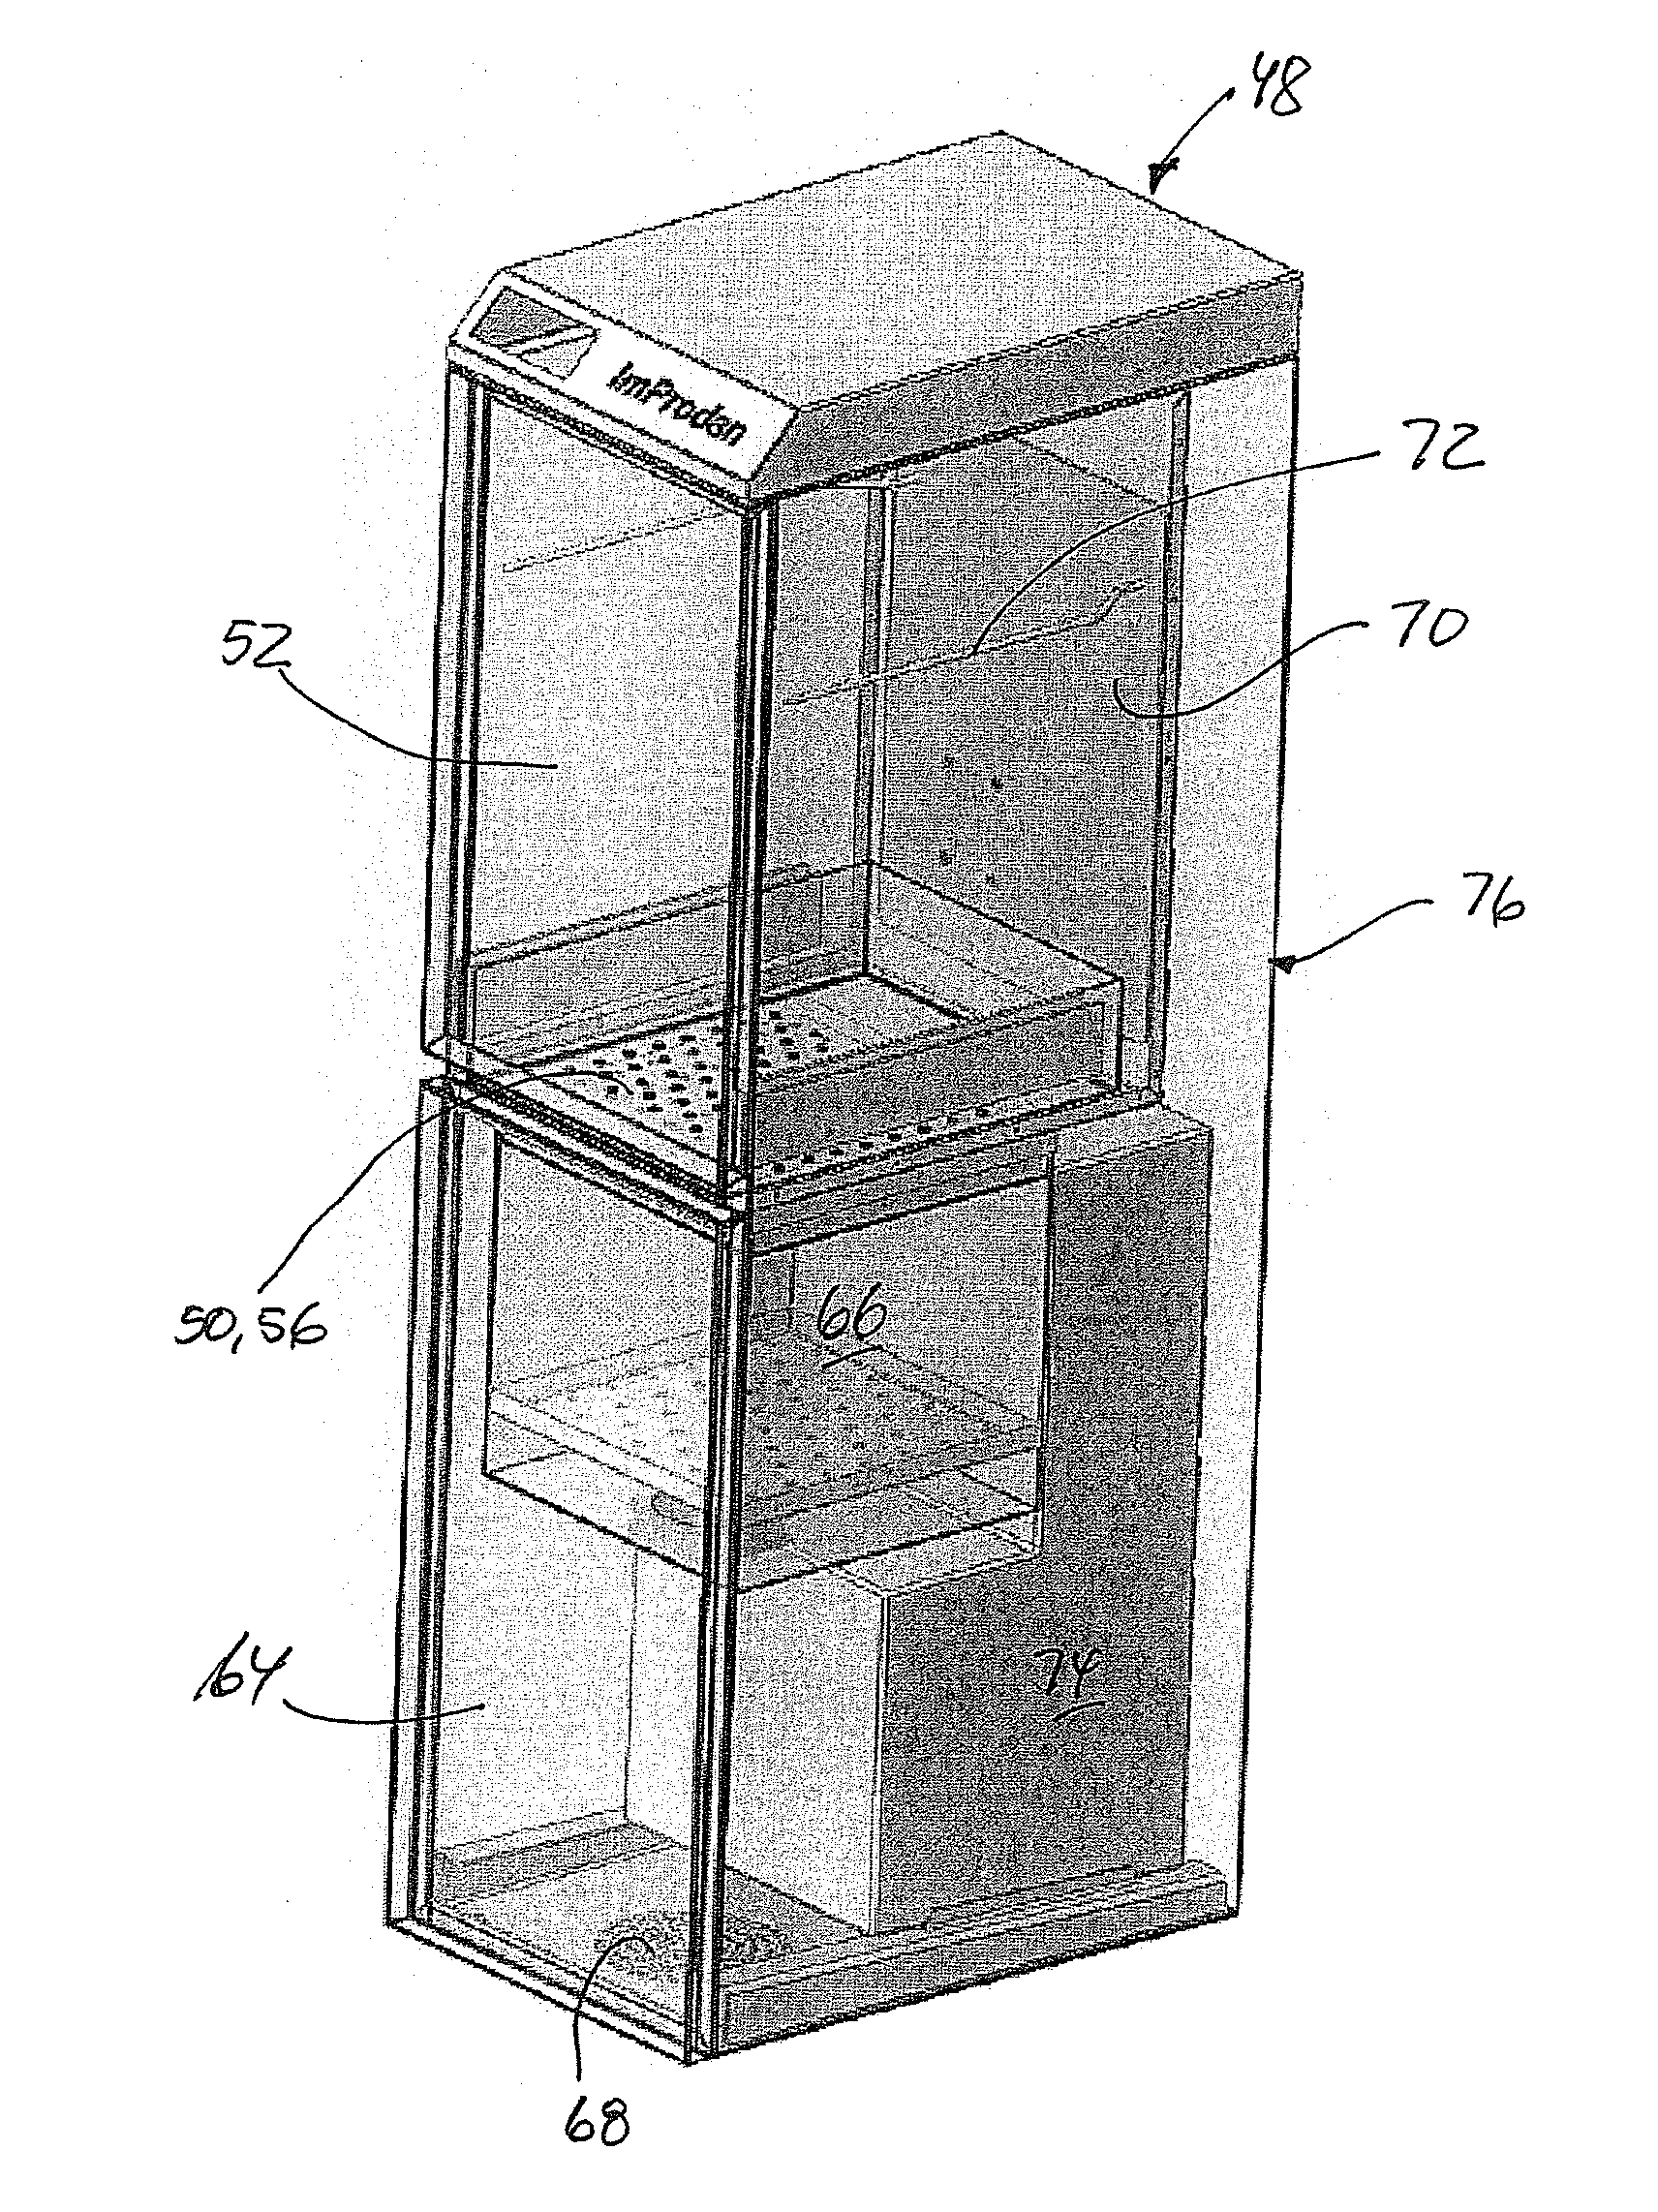 Method and apparatus for impregnation of items